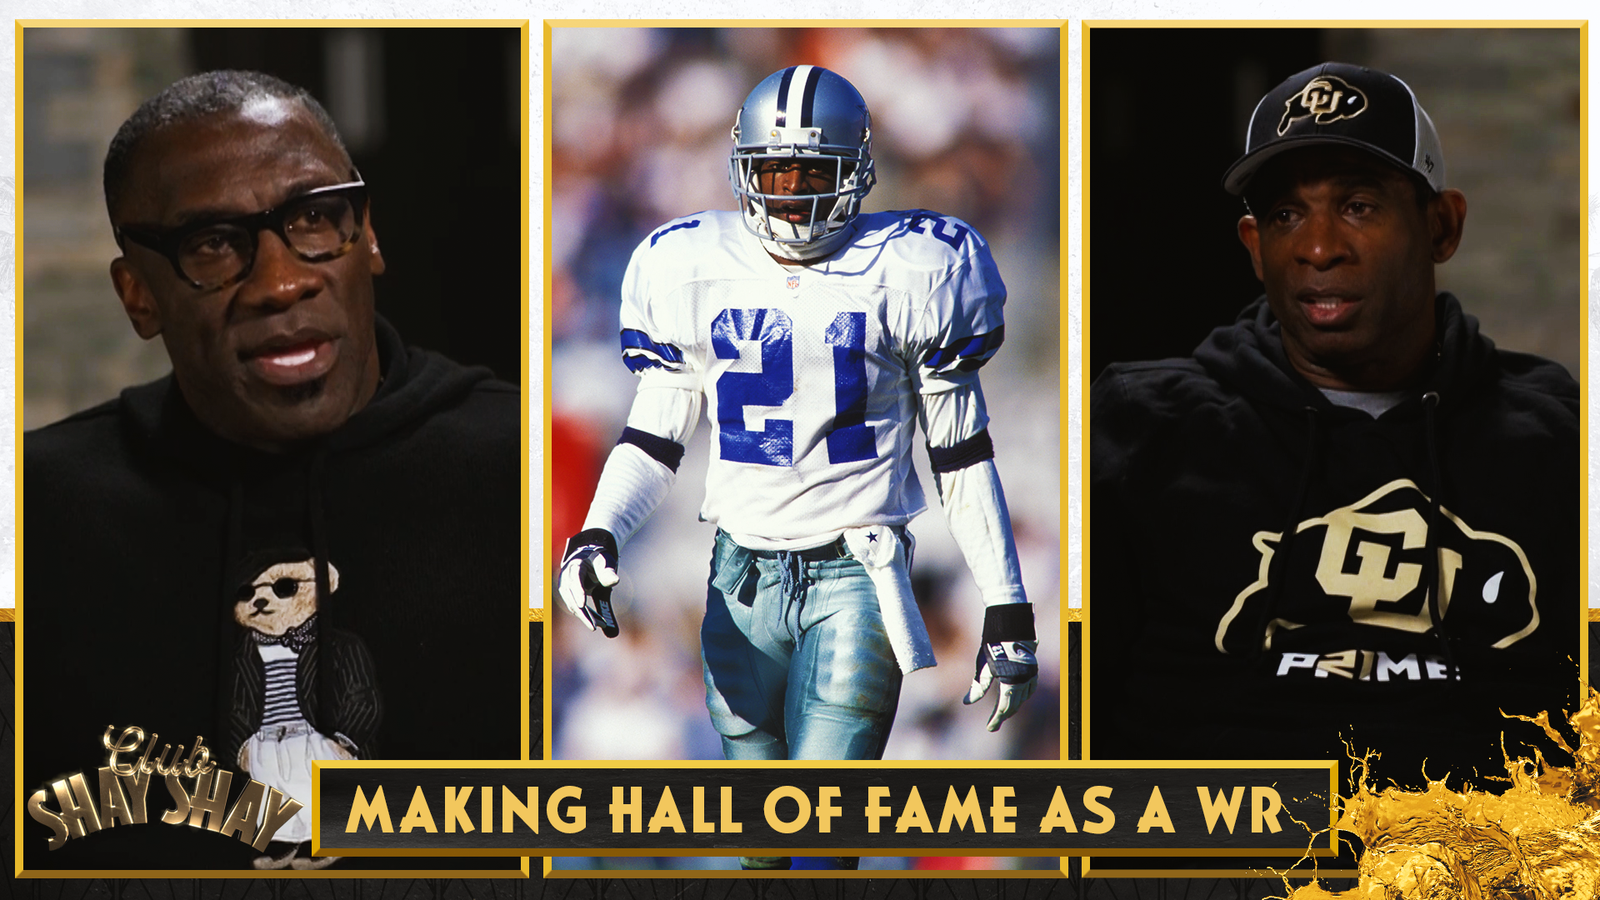 Deion Sanders thinks he could have made the Hall of Fame as a receiver